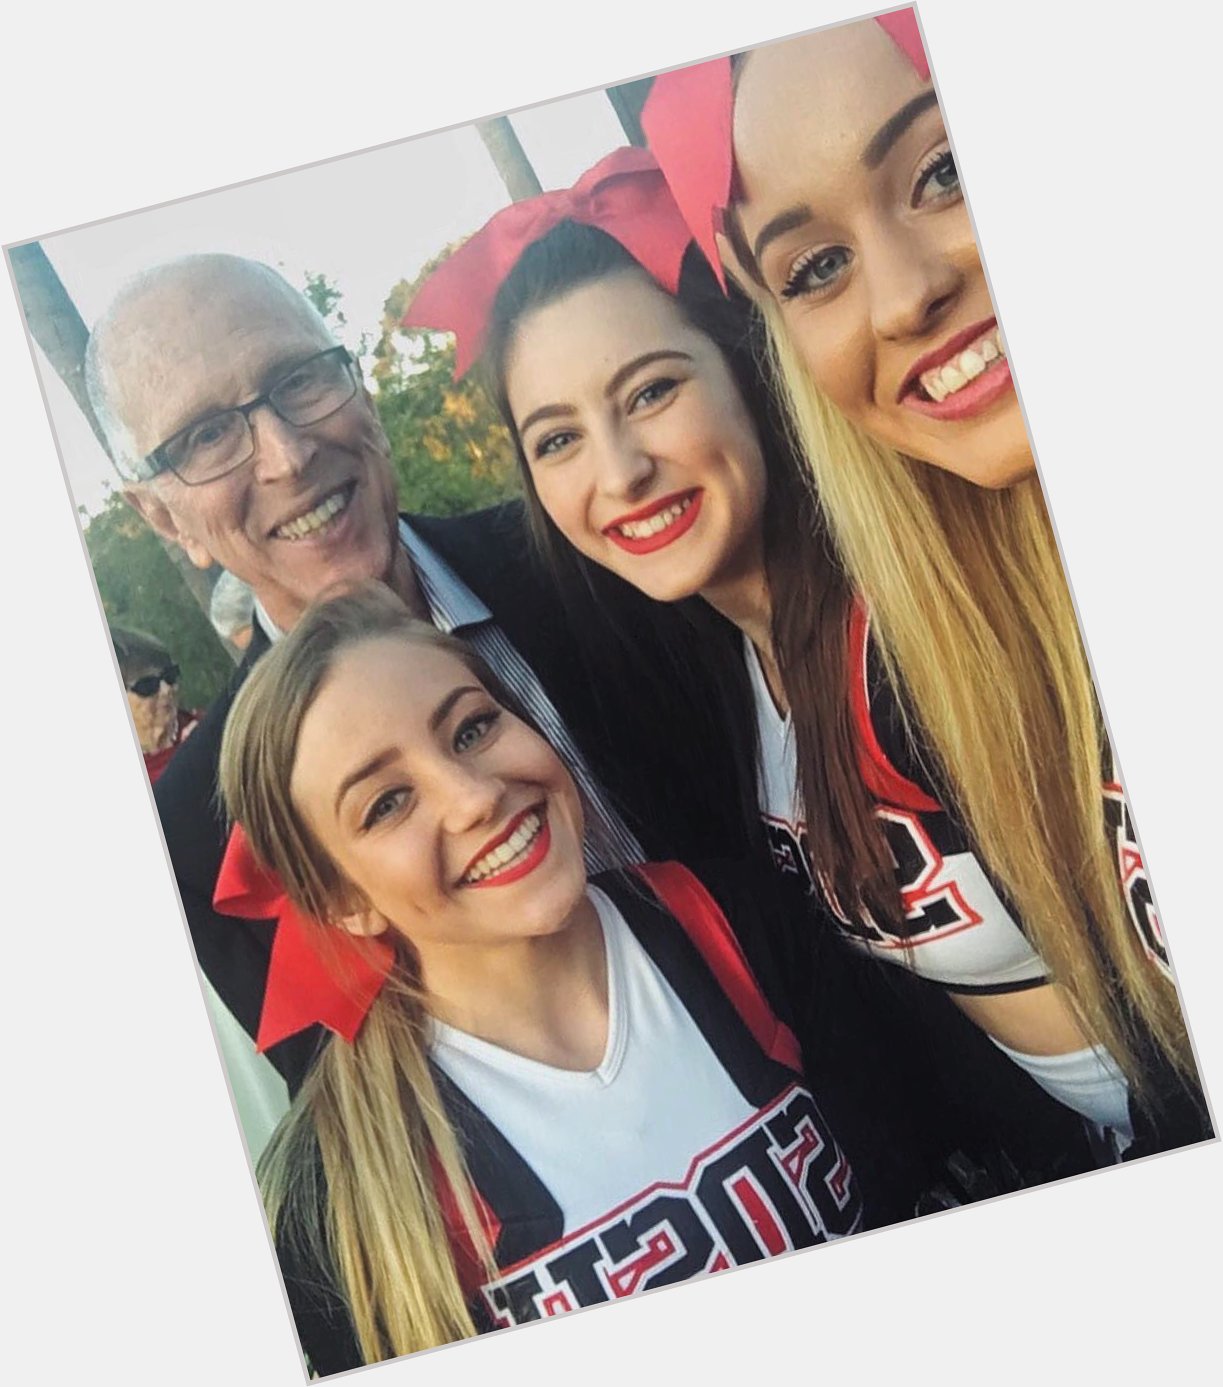 Happy birthday to one of our most favorite coaches, Steve Fisher!! We hope you have a fantastic birthday!   